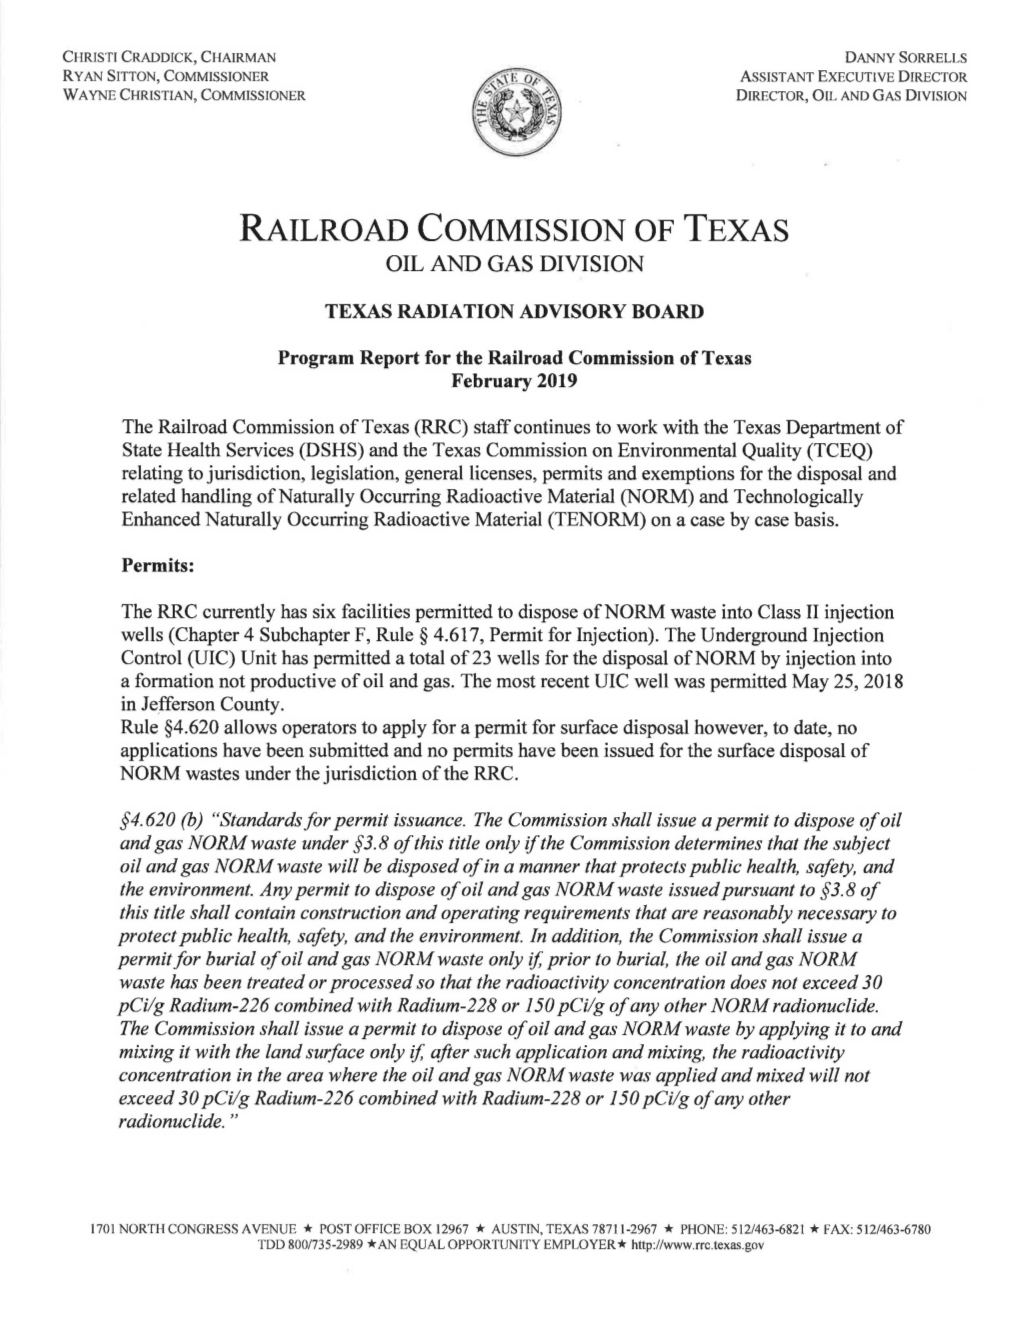 Program Report for the Railroad Commission of Texas February 2019